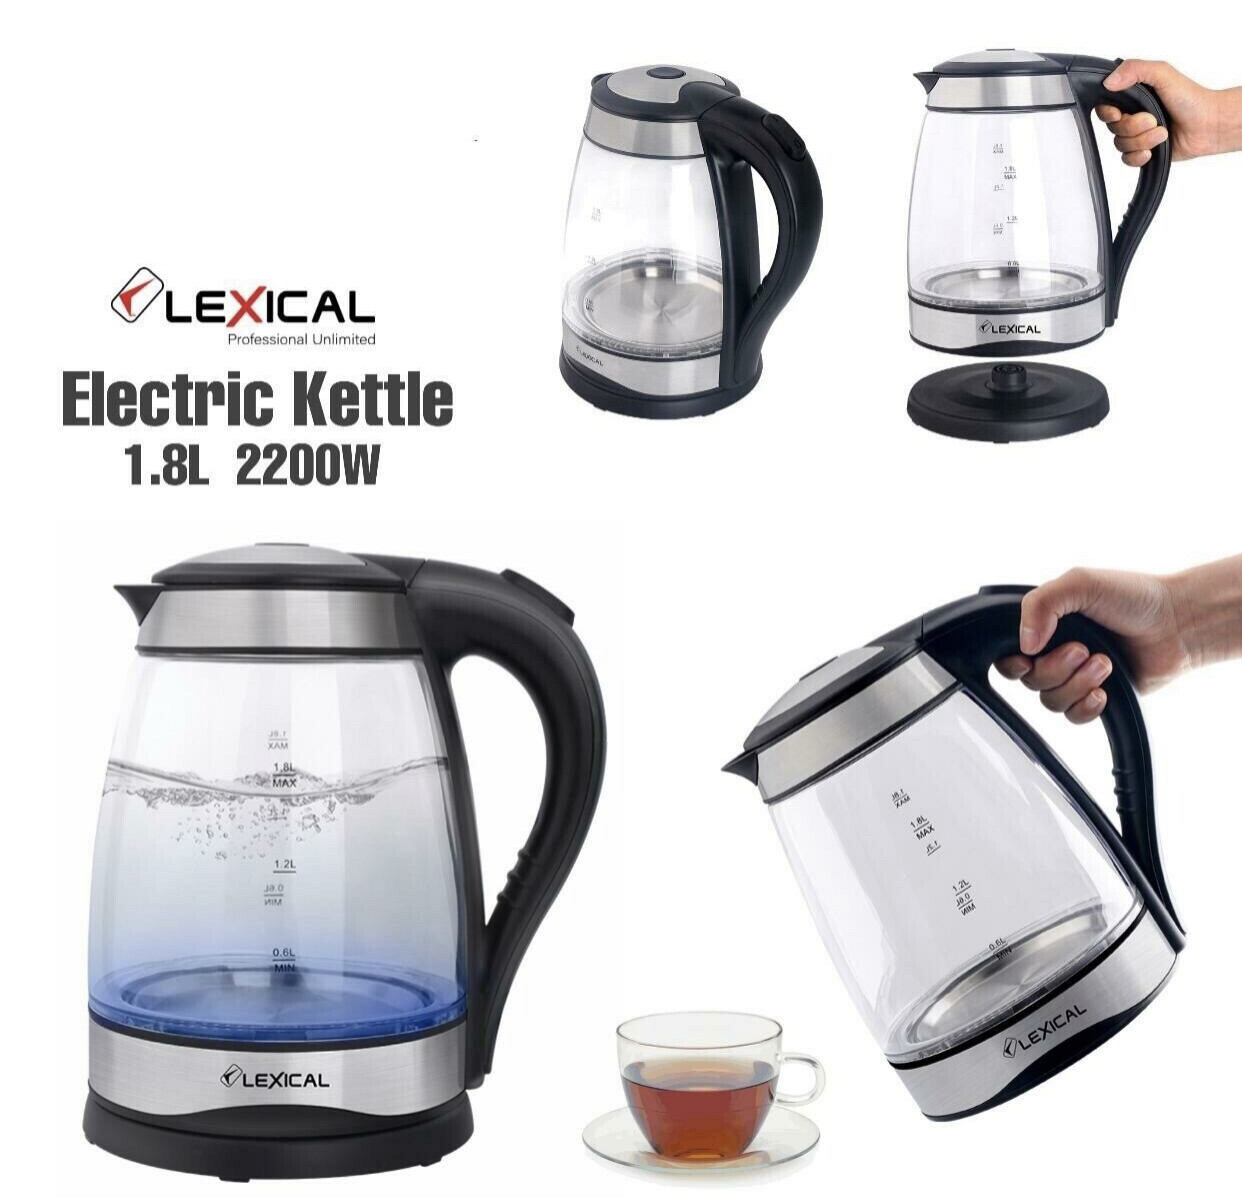 LEXICAL Electric Kettle